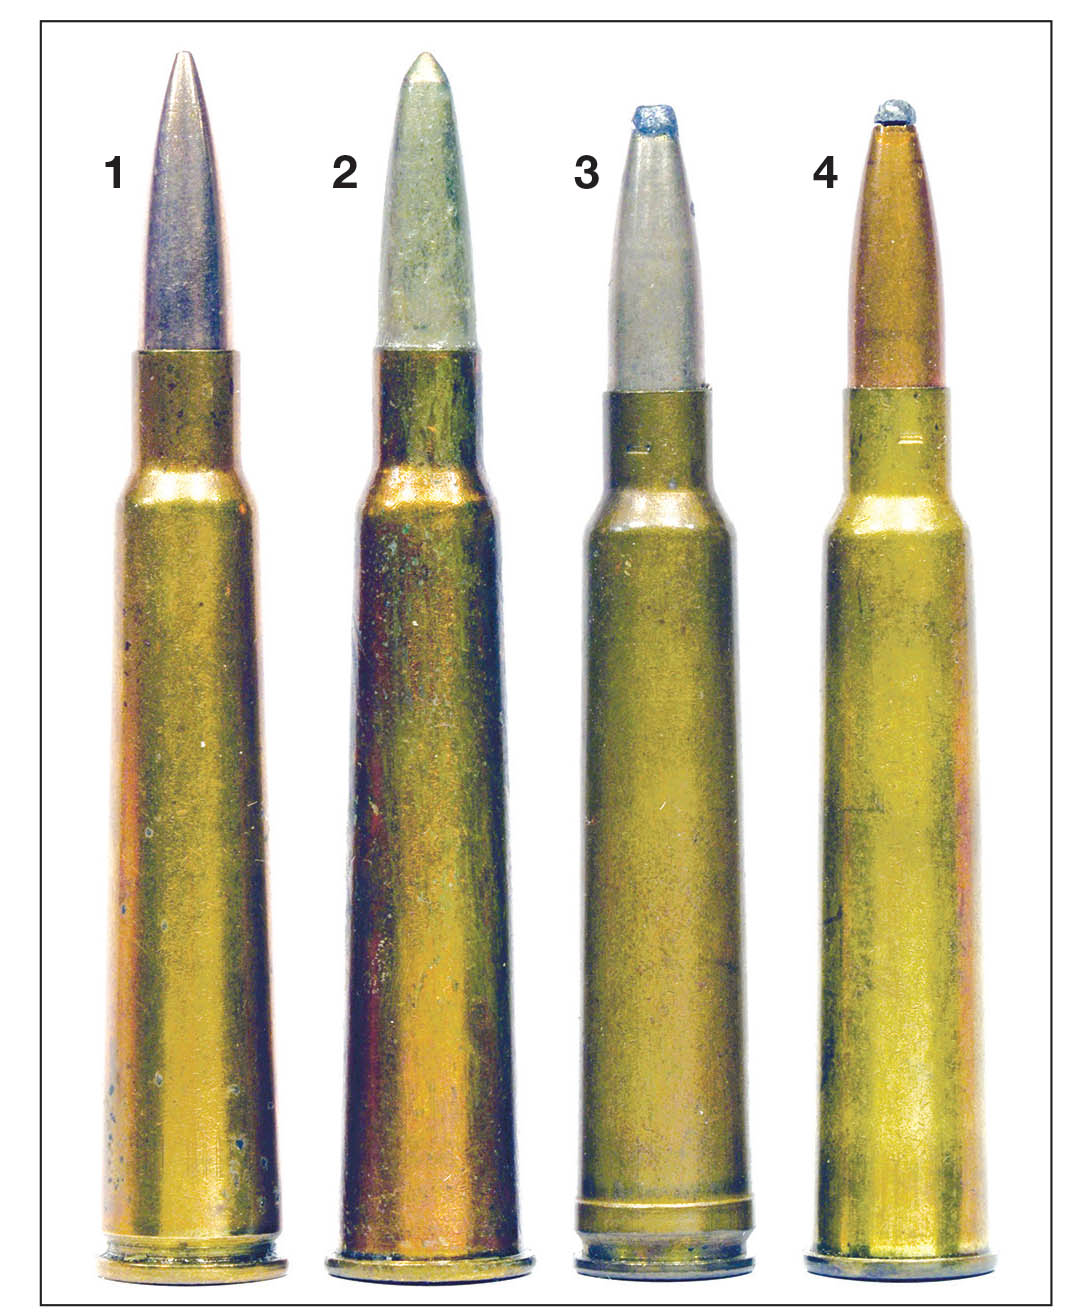 The .280 Ross inspired cartridge development by other London gunmakers. Examples include the (1) .280 Ross,  (2) .280 Magnum (Rimmed Ross), (3) .275 Holland & Holland and the (4) .275 H&H Rimmed.